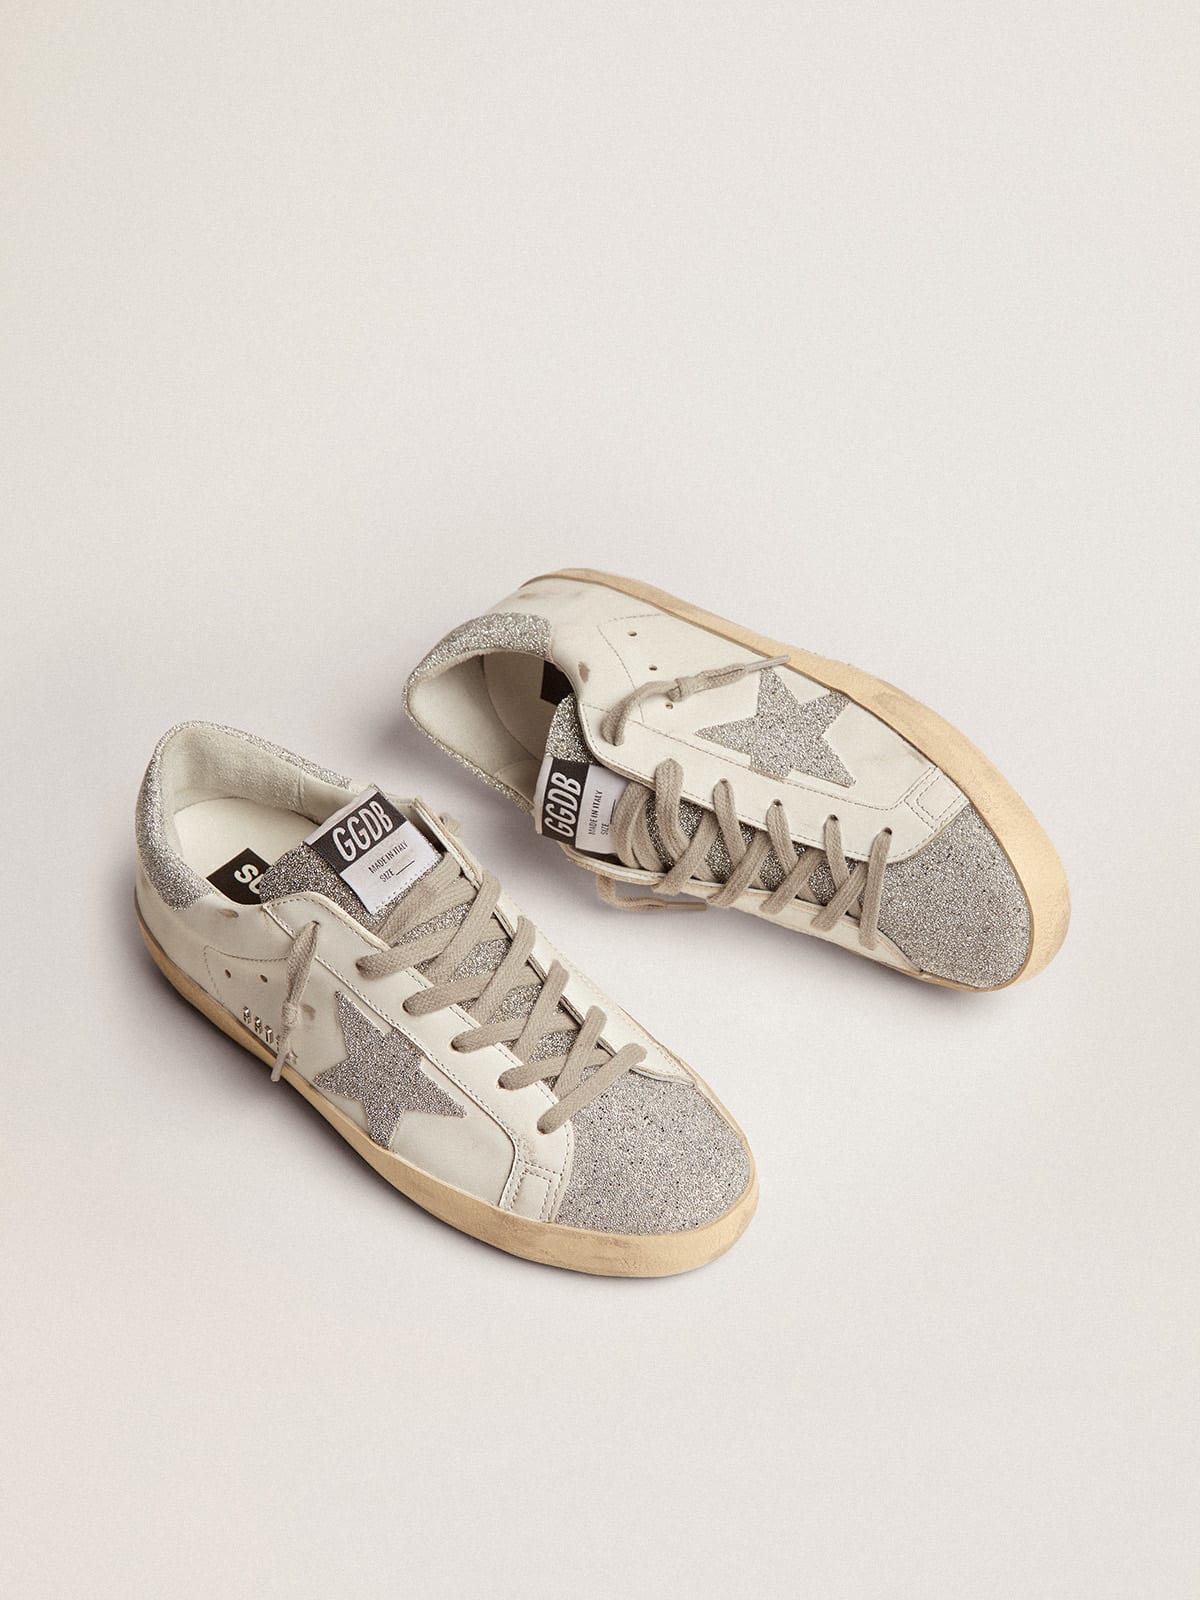 Golden Goose - Super-Star sneakers with white leather upper and Swarovski crystal inserts in 